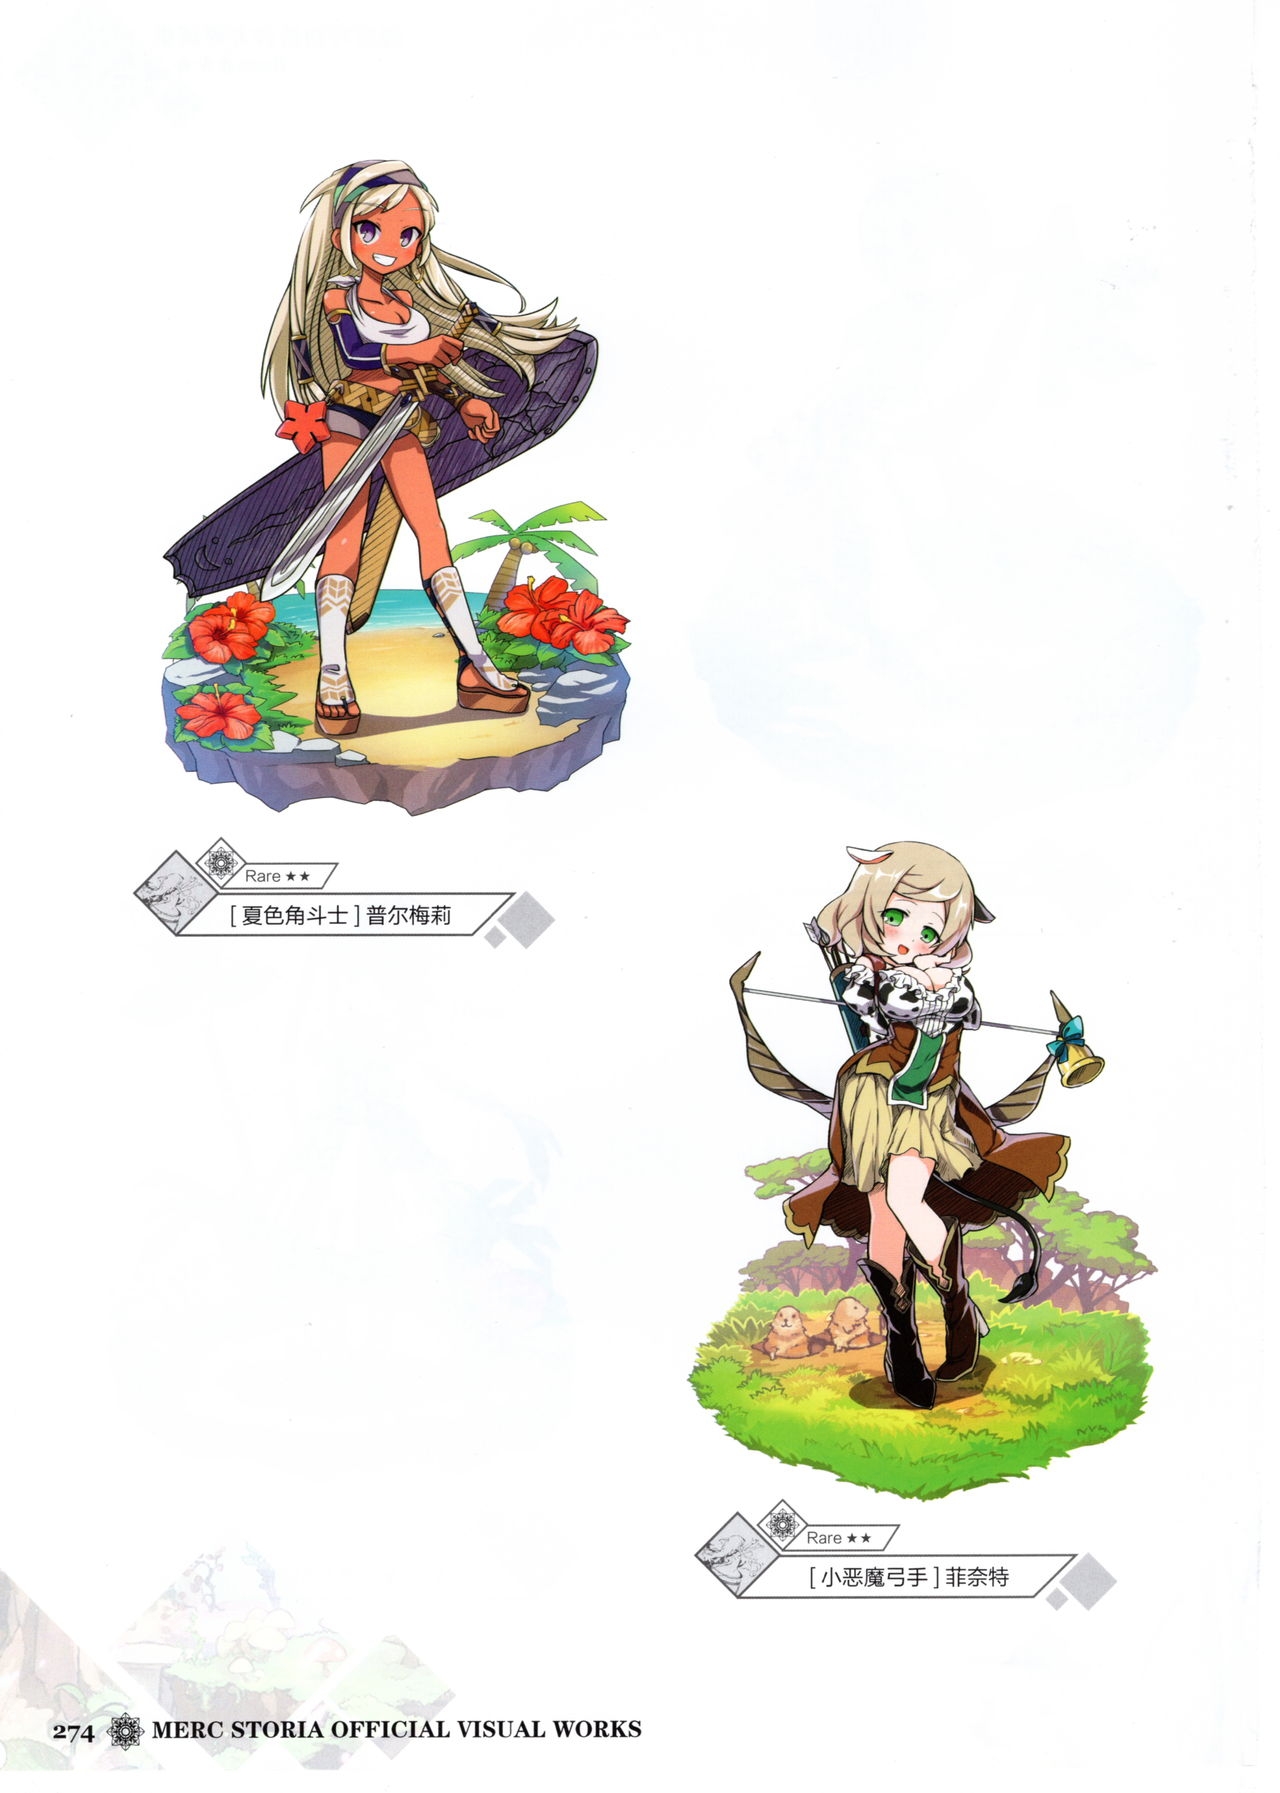 Merc Storia Official Visual Works [Chinese] 276